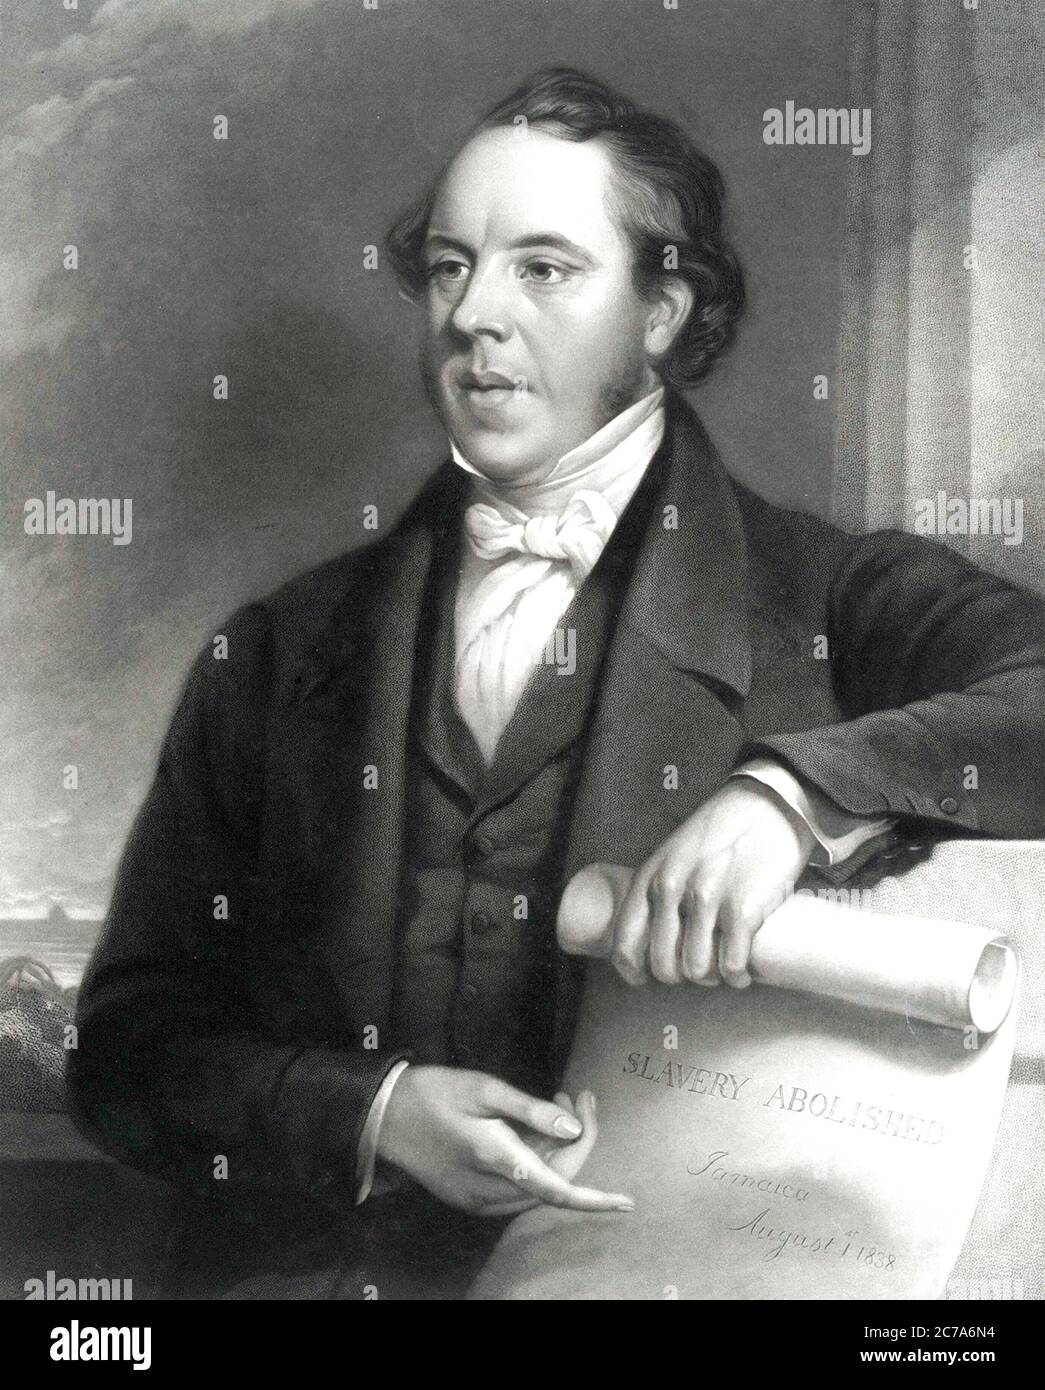 THOMAS CLARKSON (1760-1846) English abolitionist. Engraving about 1840 showing Clrkson with a scroll saying 'Slavery abolished; Jamaica; August 1st 1838' referring to the date the 'apprenticeships' of former slaves  ended. Stock Photo